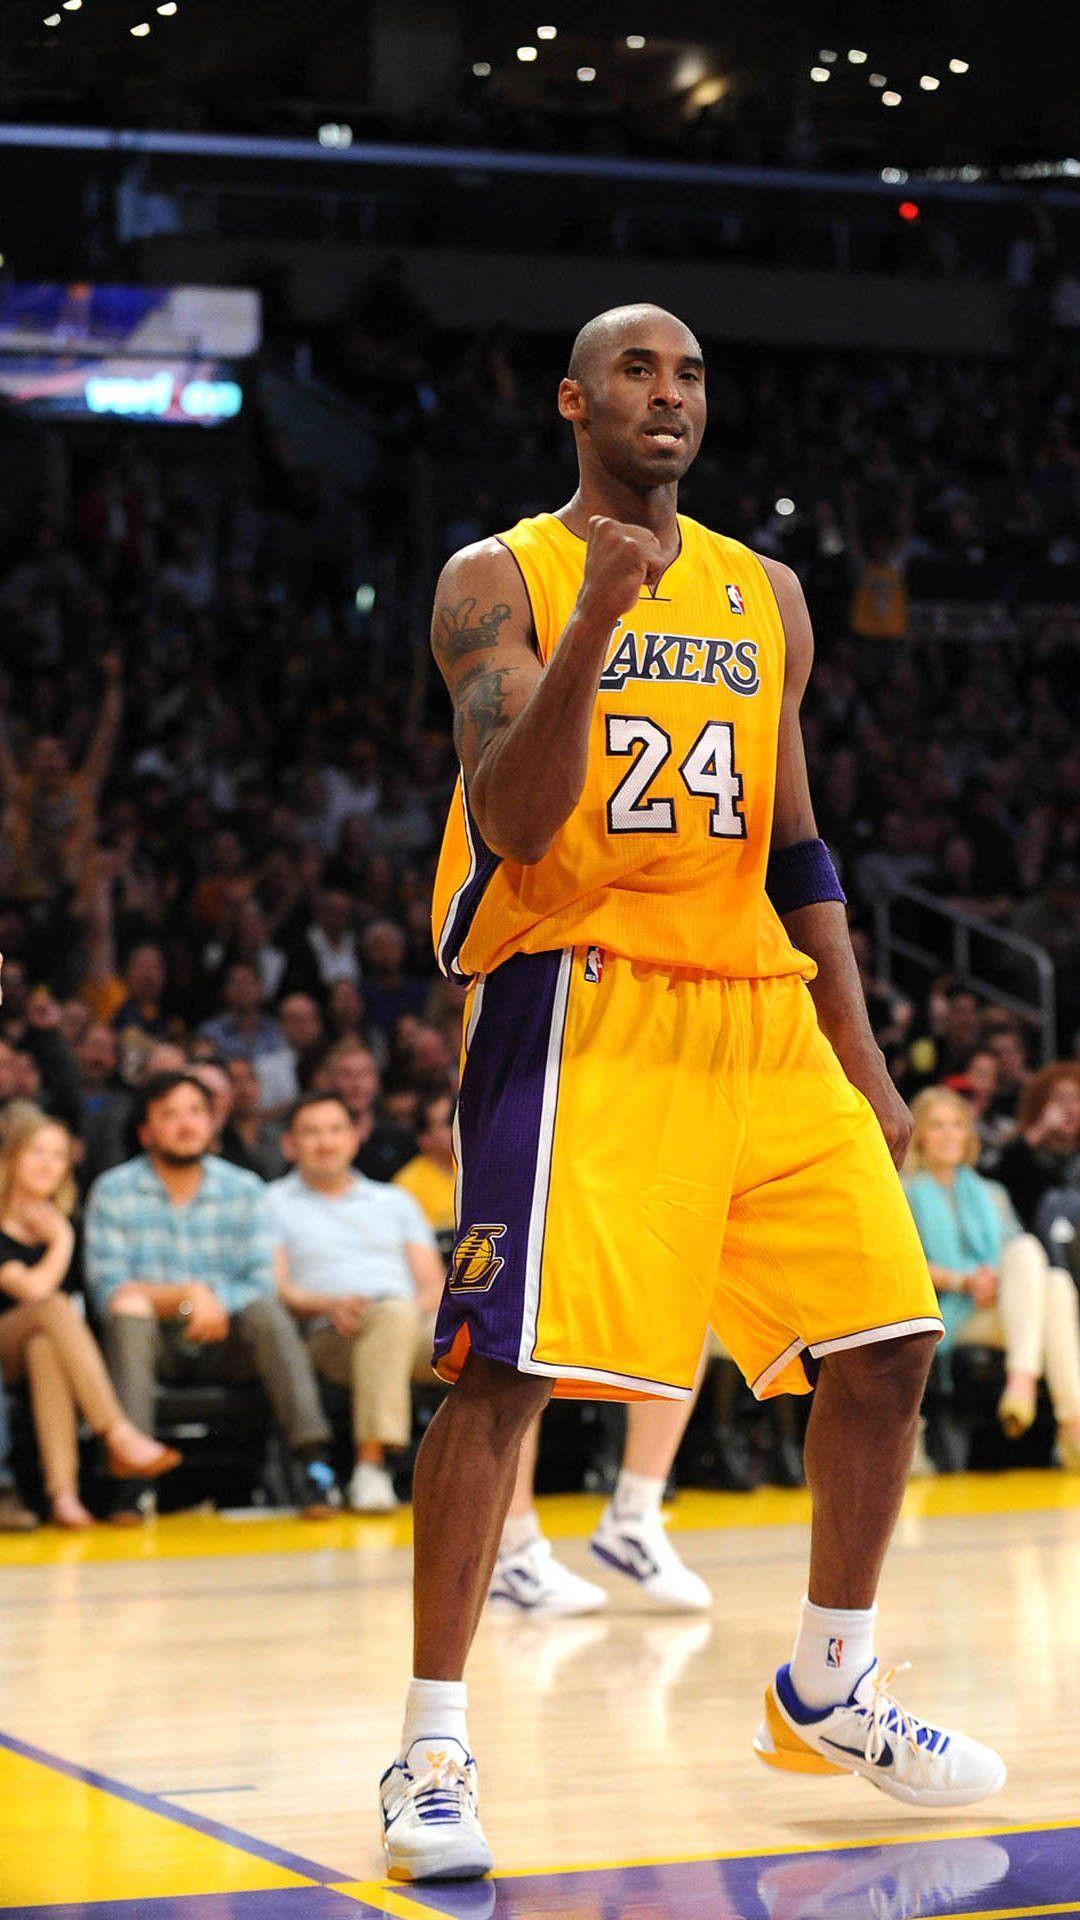 A man in basketball uniform standing on the court - Kobe Bryant